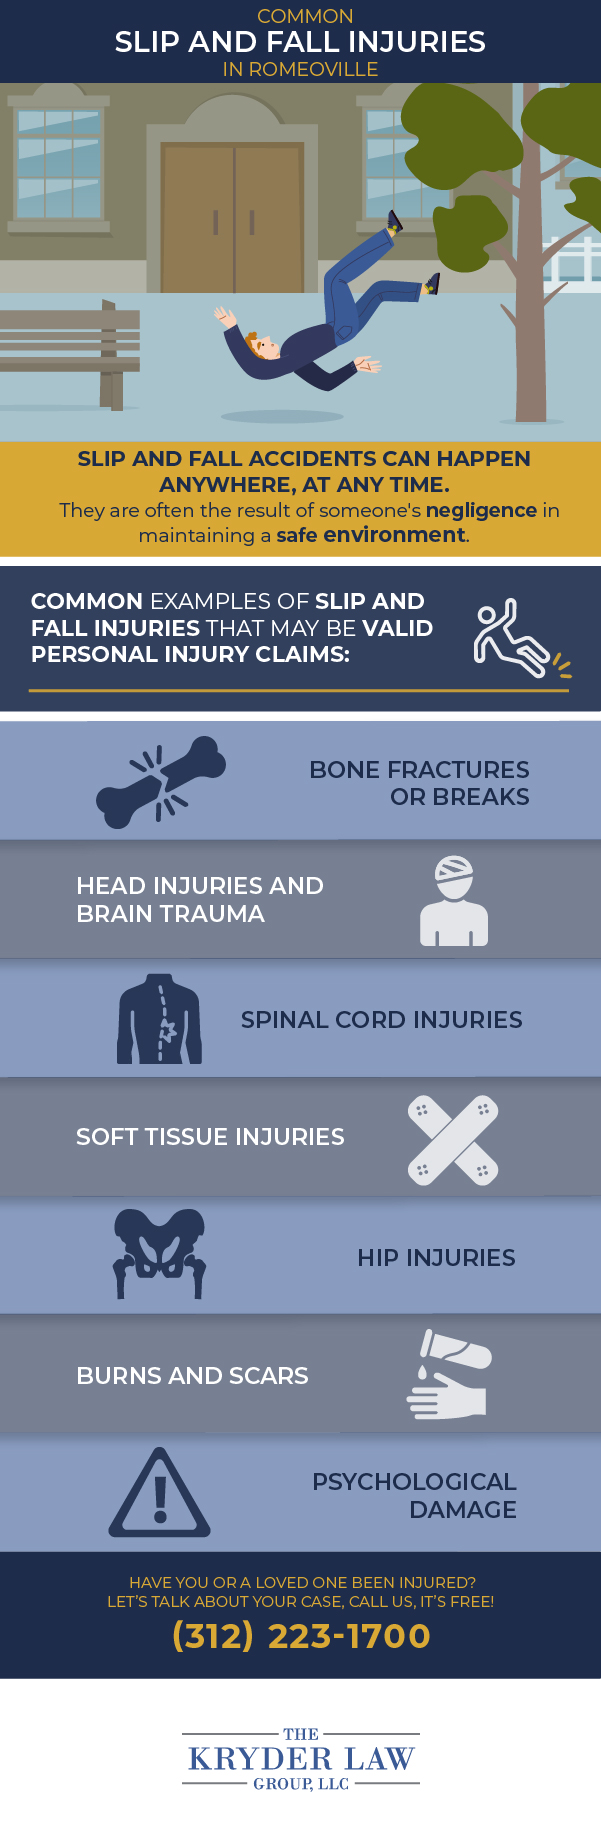 The Benefits of Hiring a Romeoville Slip and Fall Injury Lawyer Infographic